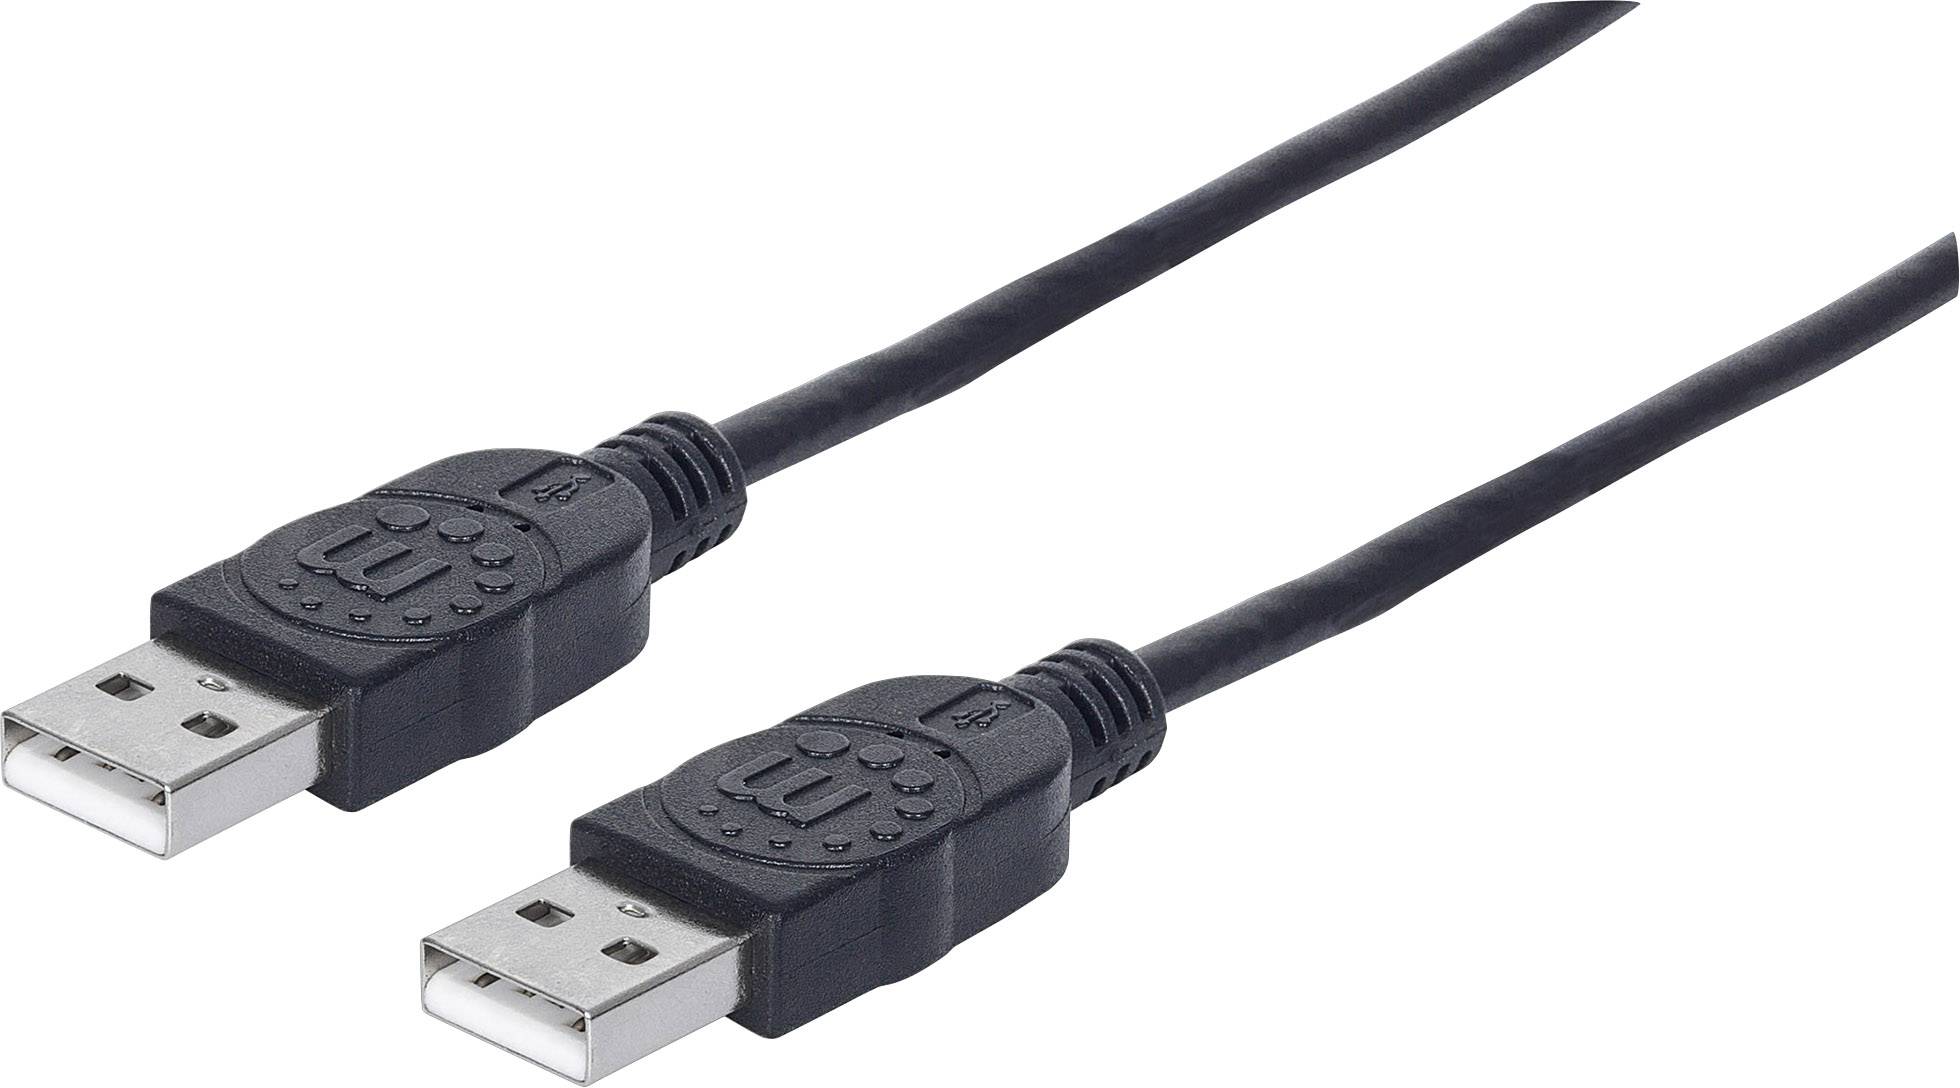 MANHATTAN USB 2.0 Cable, Type-A Male to Type-A Male, 3 m (10 ft.), Black